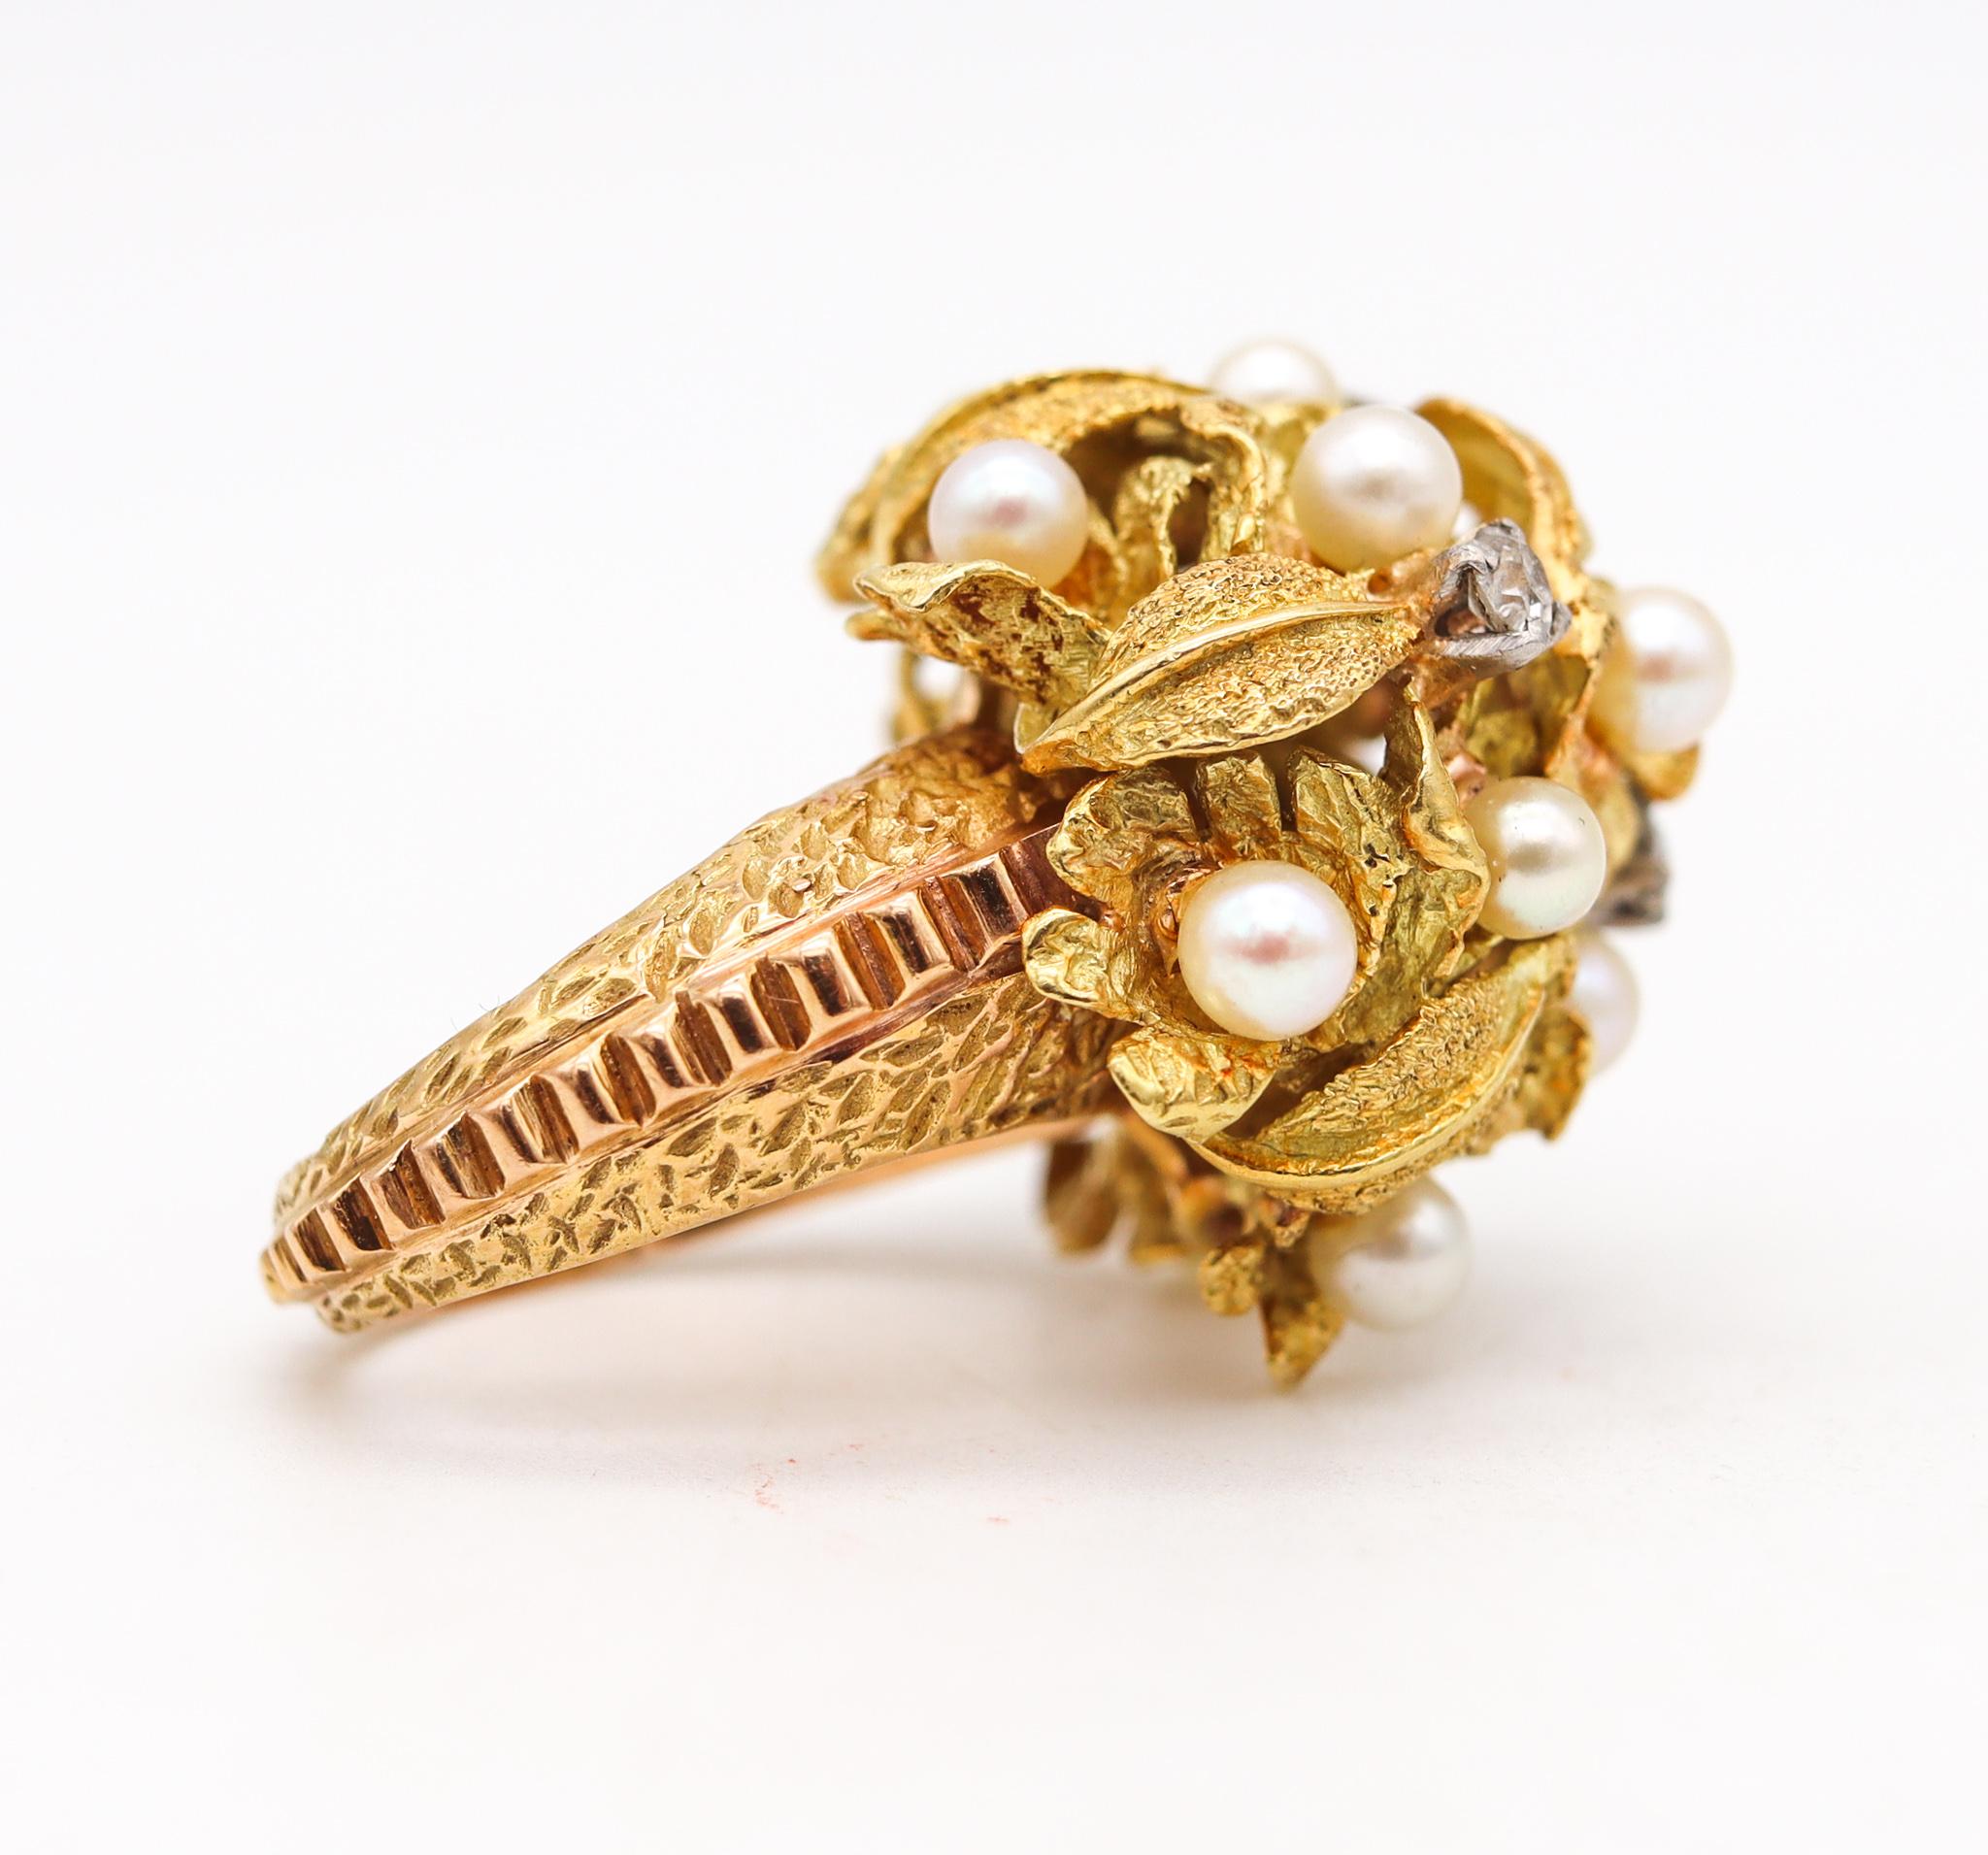 Brilliant Cut Mid Century 1950 Post War Cocktail Ring 18Kt Gold Platinum with Pearls Diamonds